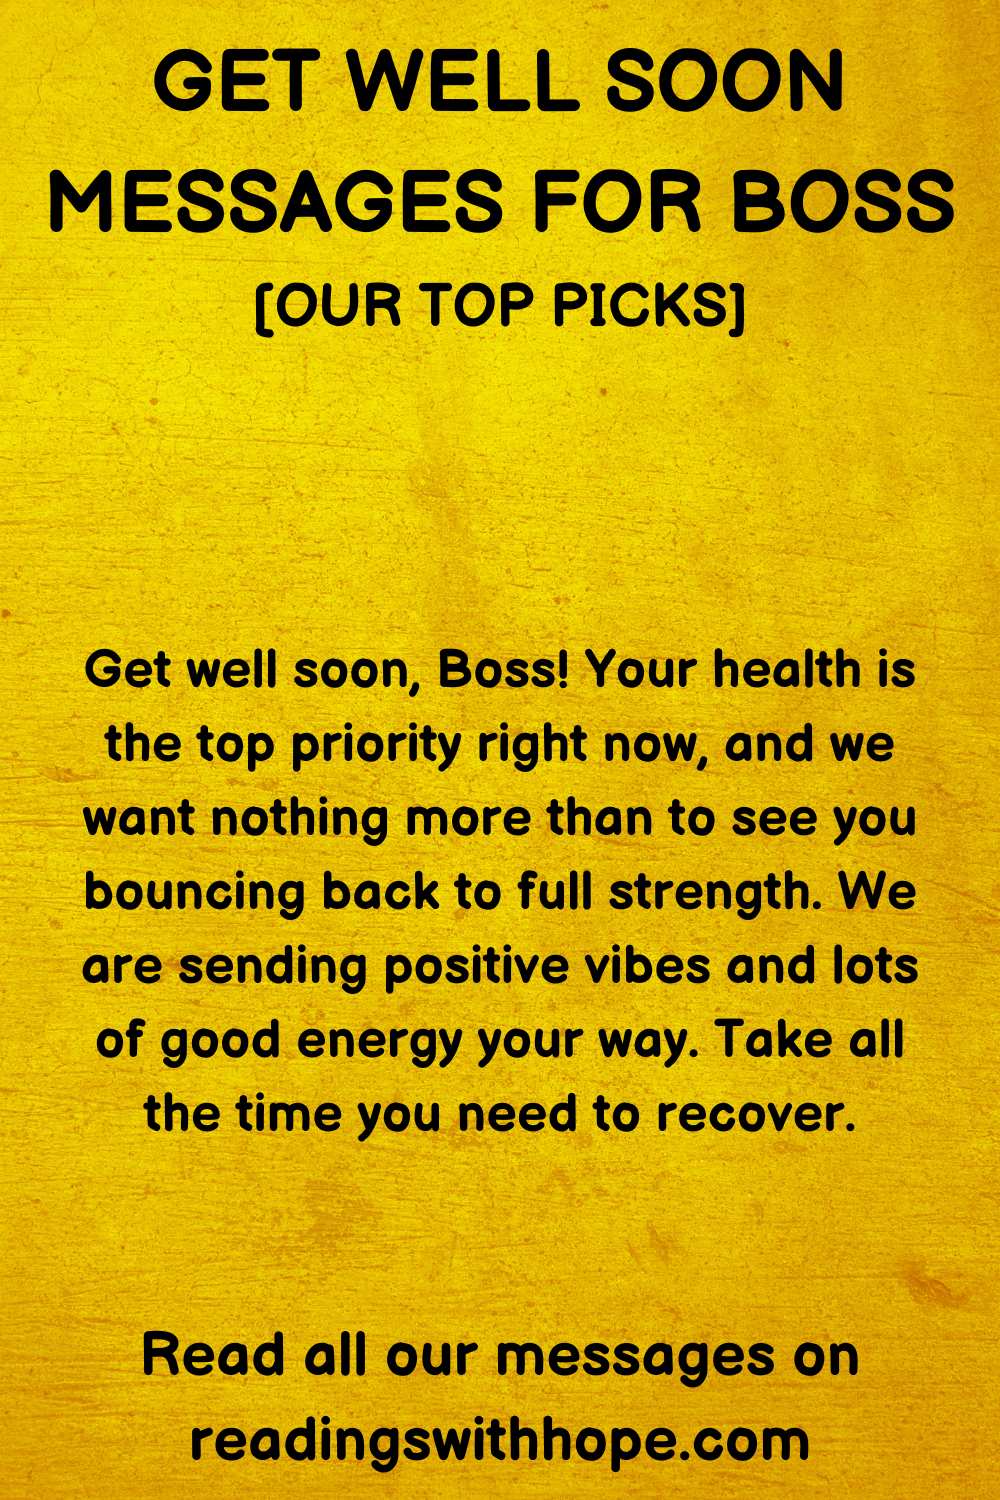 Get Well Soon Message for Boss
